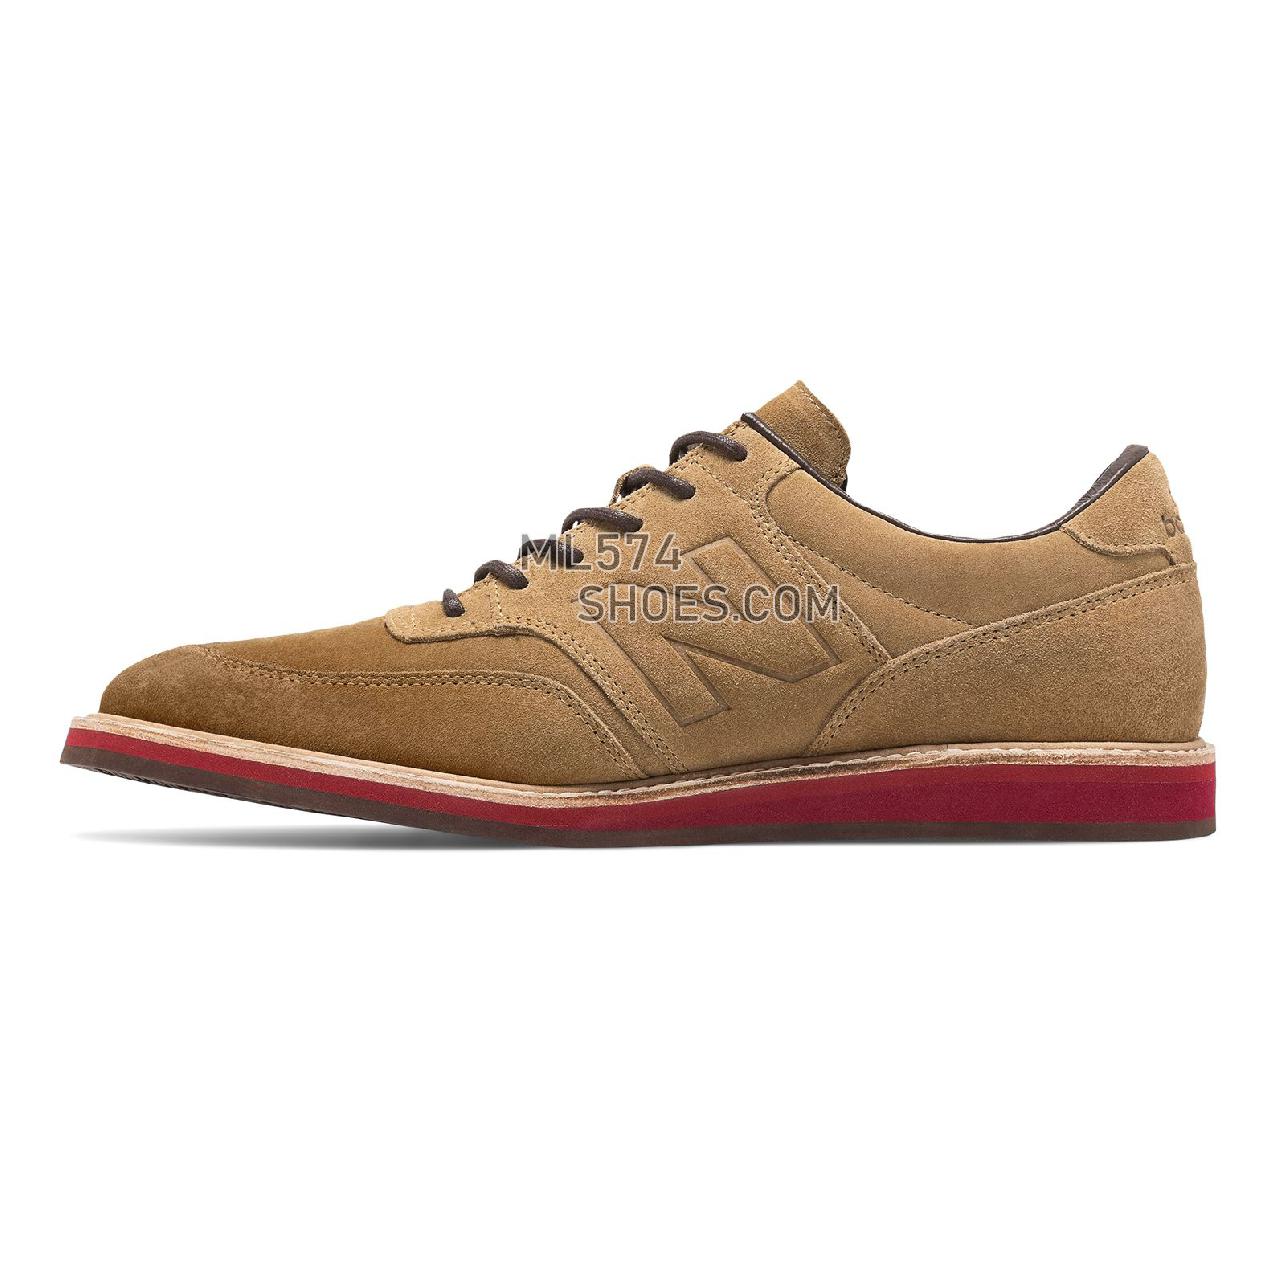 New Balance 1100 - Men's 1100 - Walking Brown with Maroon - MD1100DB